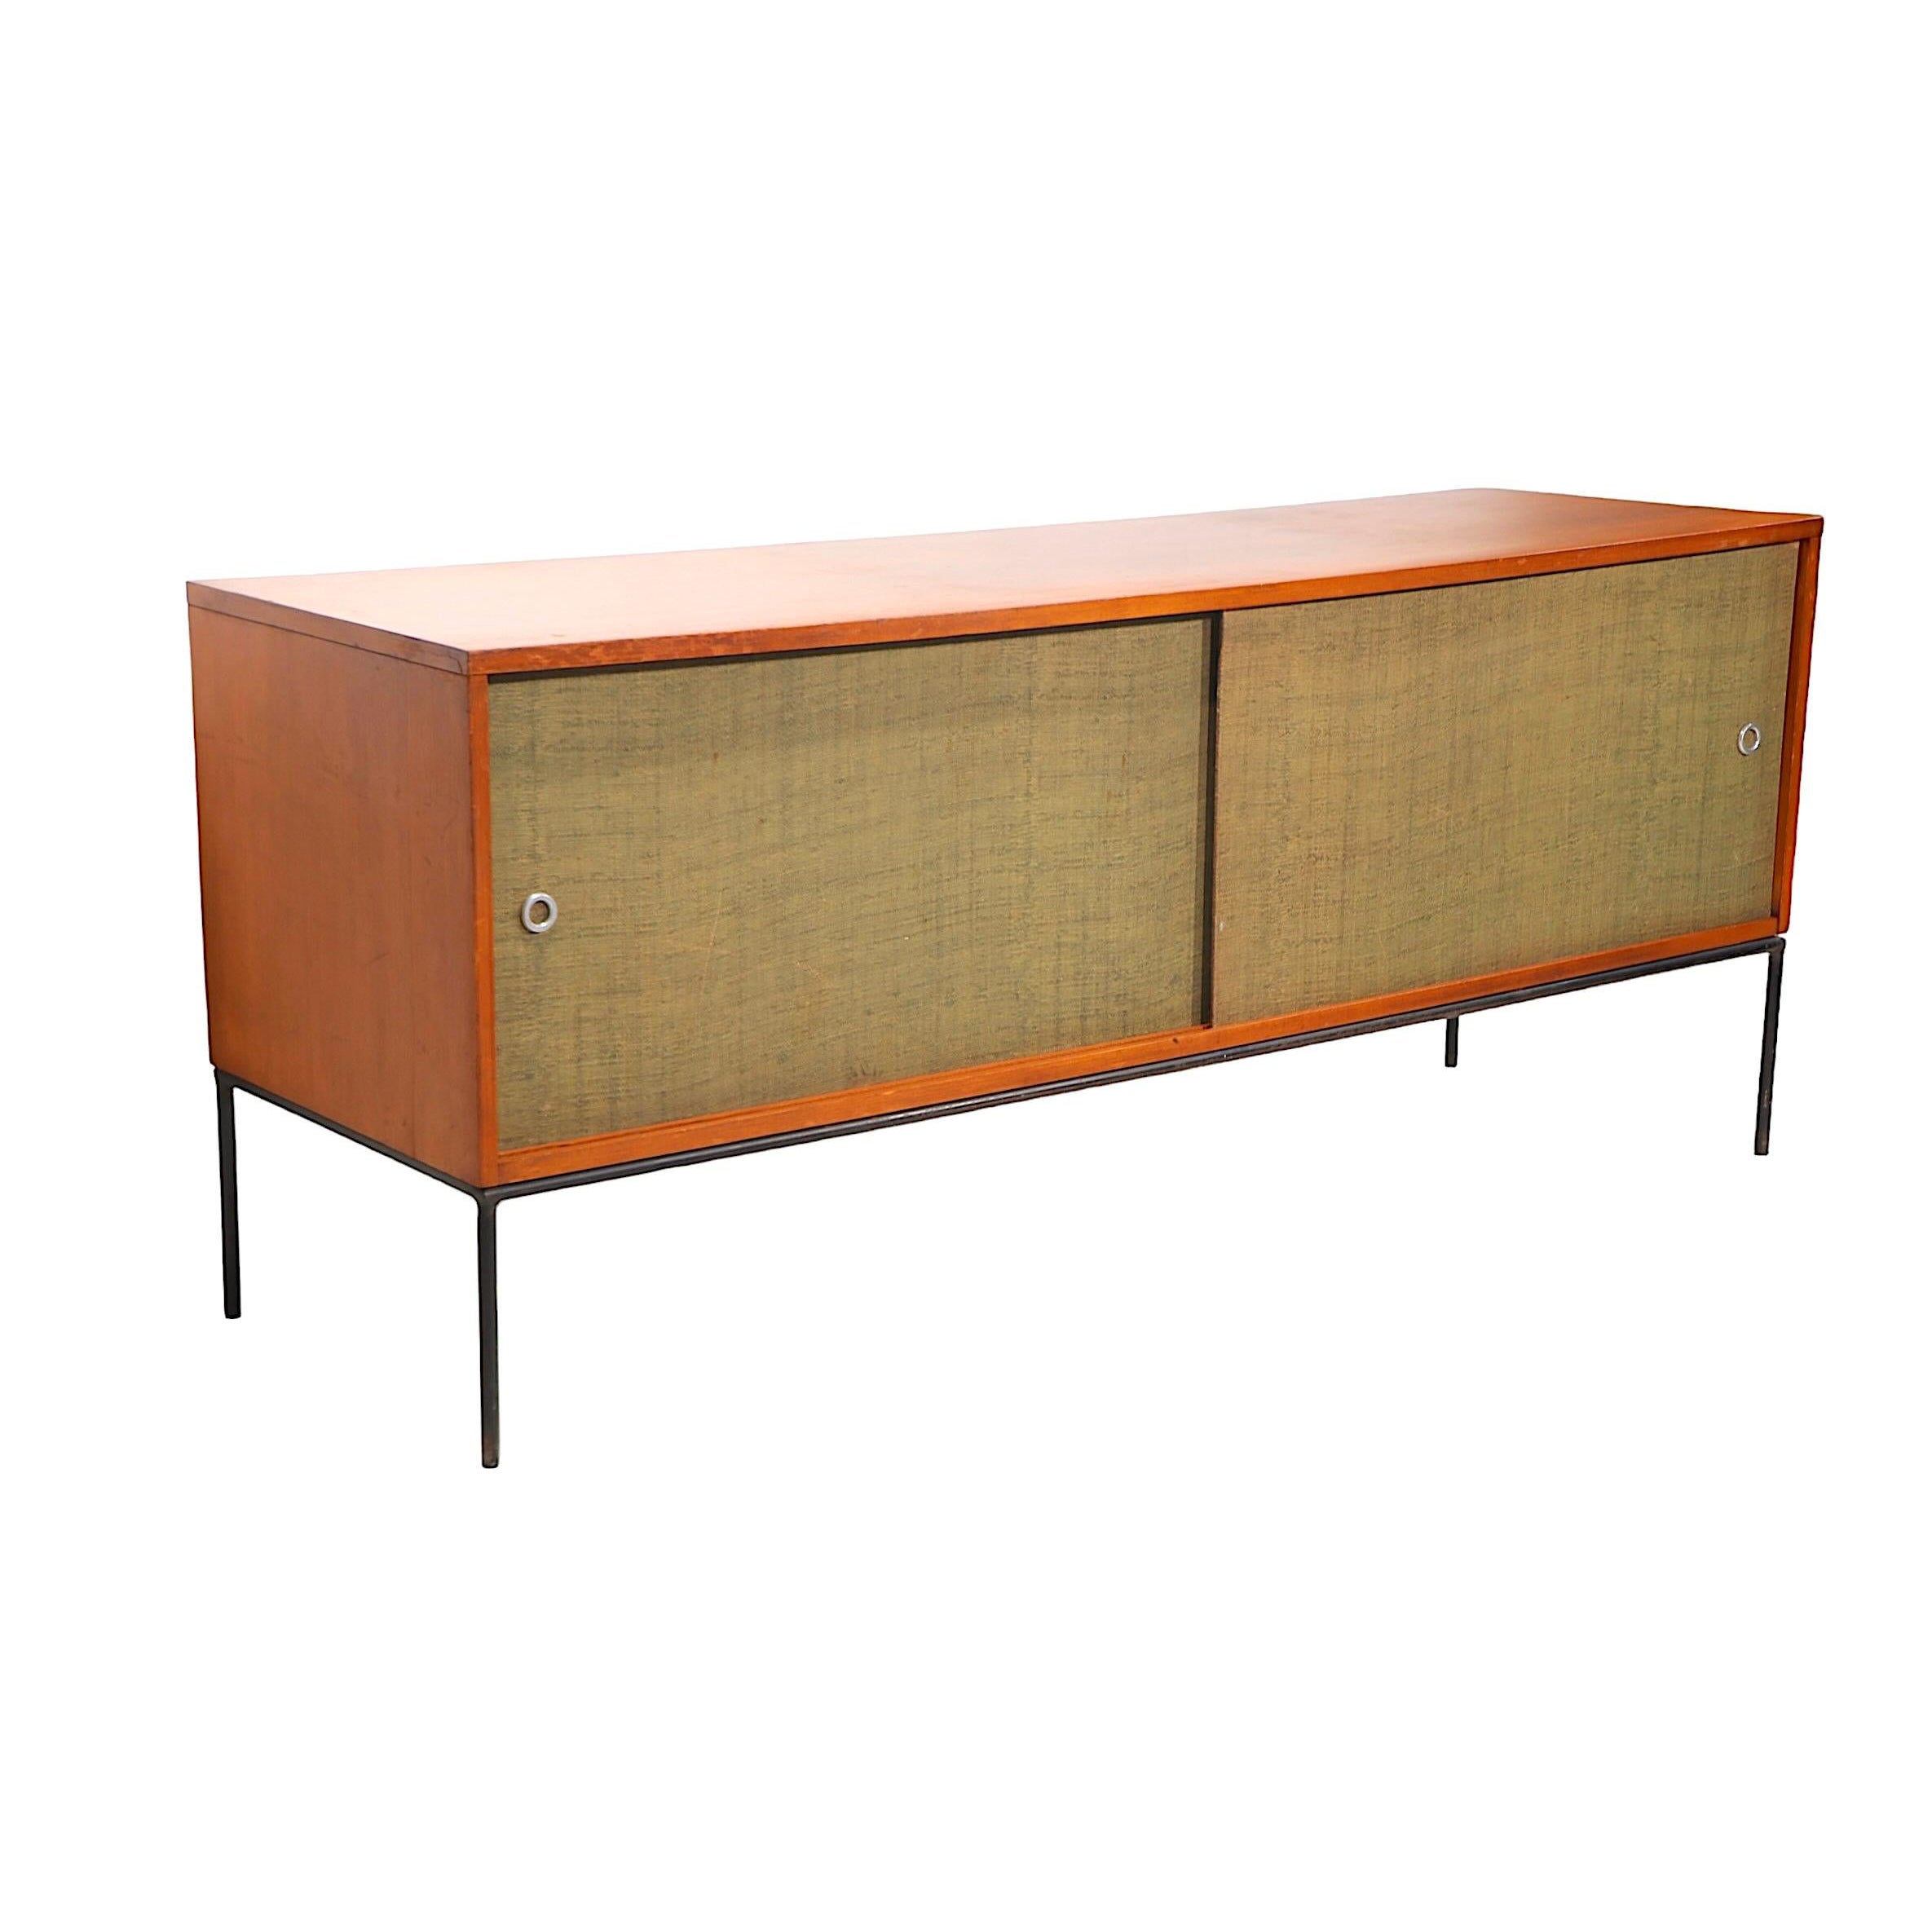  Mid Century Paul McCobb Winchendon  Planner Group Cabinet c. 1950's  For Sale